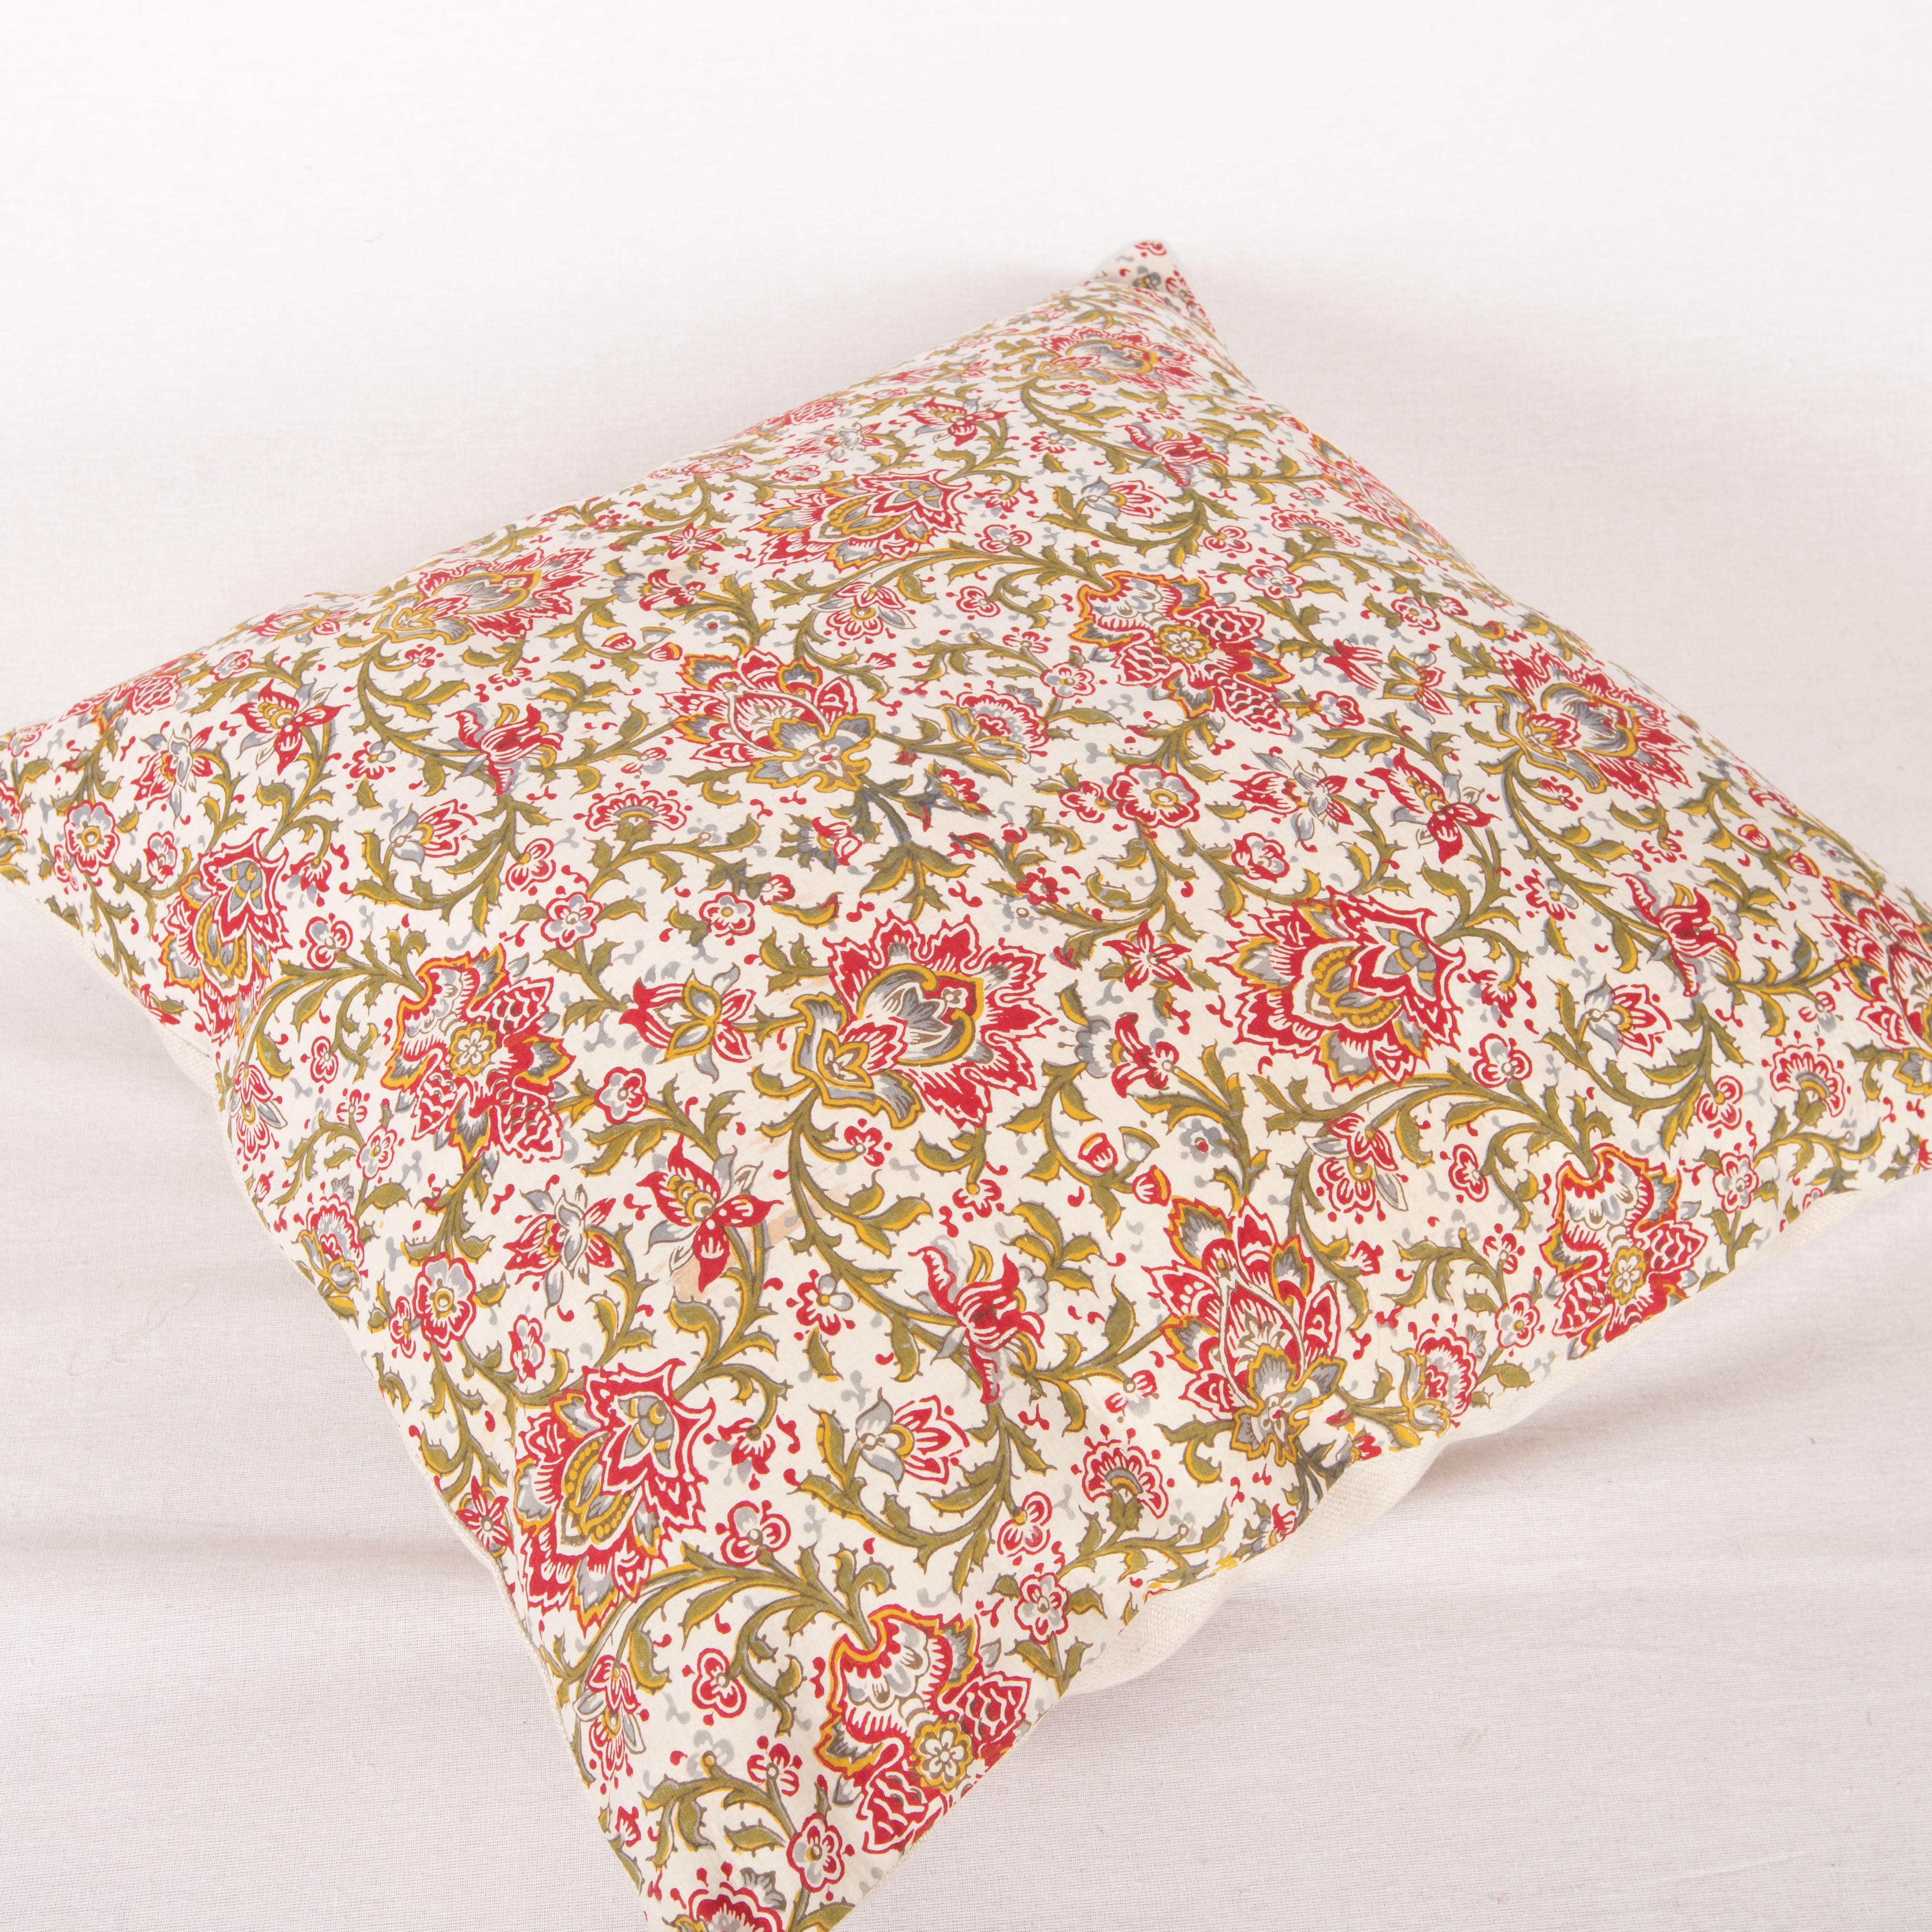 Cotton Block Print Pillow Case, Early 20th C. India